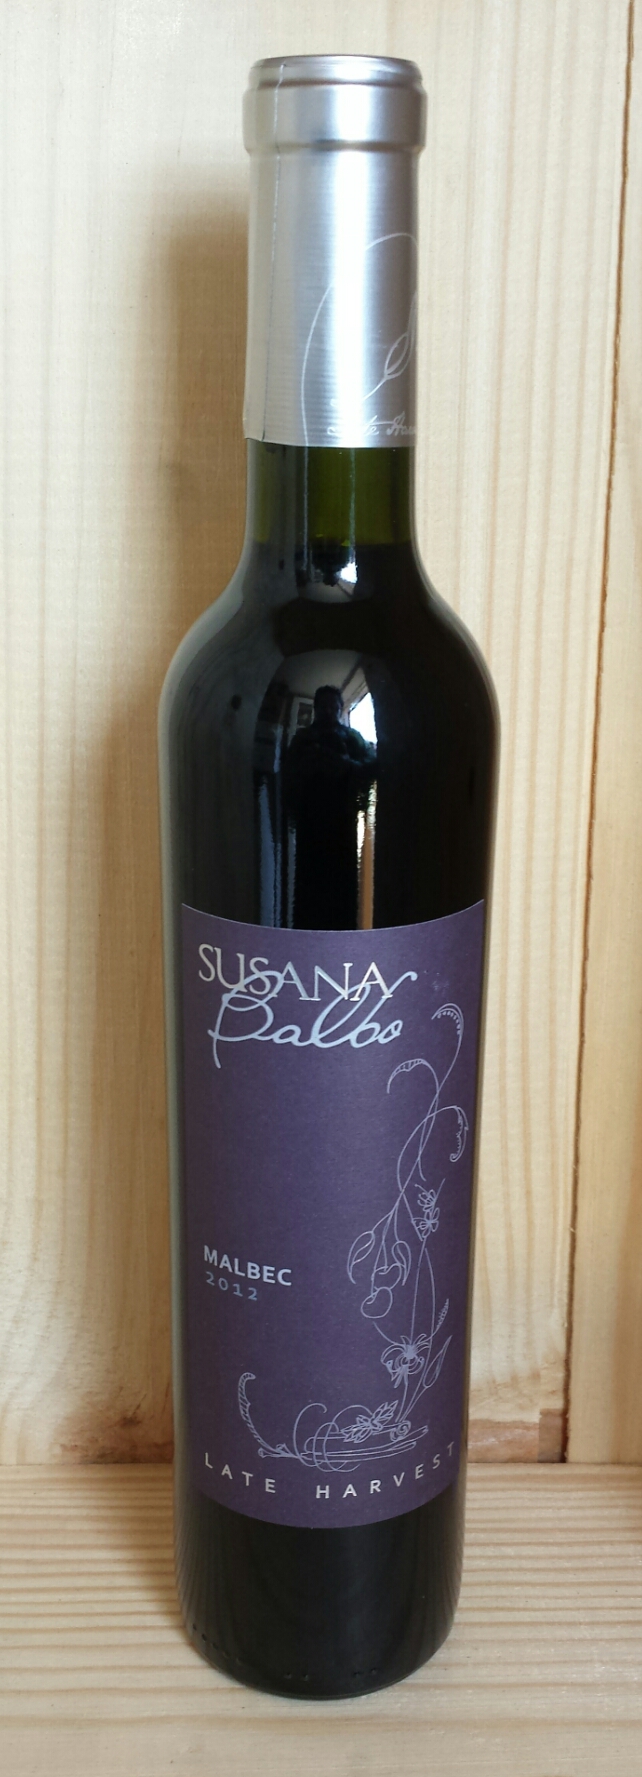 a bottle of wine with an image on the label